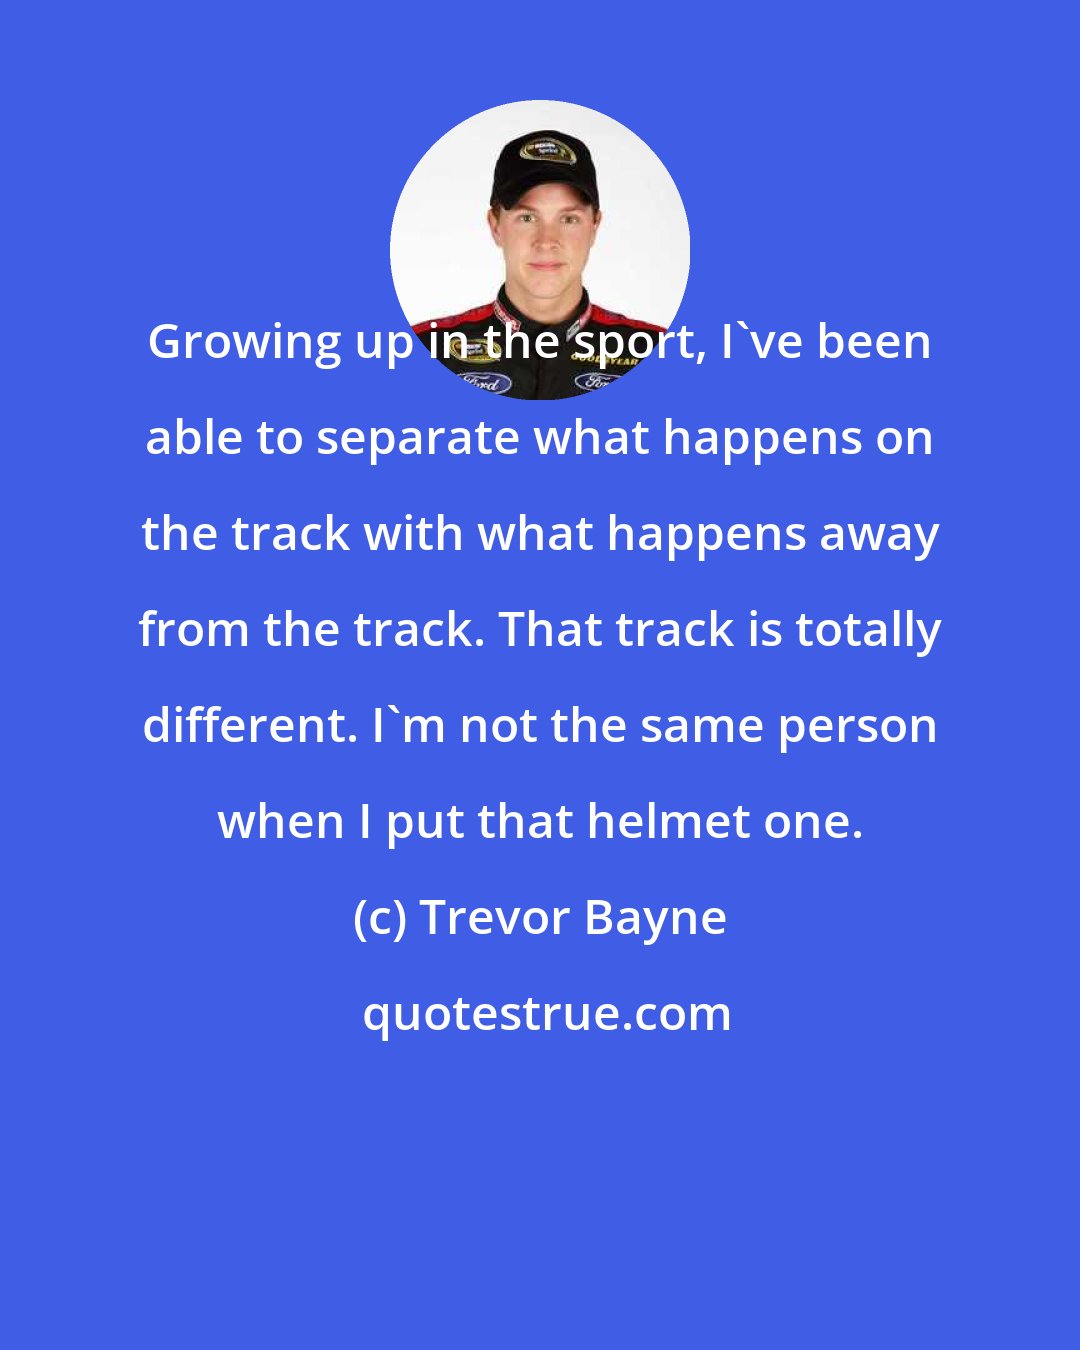 Trevor Bayne: Growing up in the sport, I've been able to separate what happens on the track with what happens away from the track. That track is totally different. I'm not the same person when I put that helmet one.